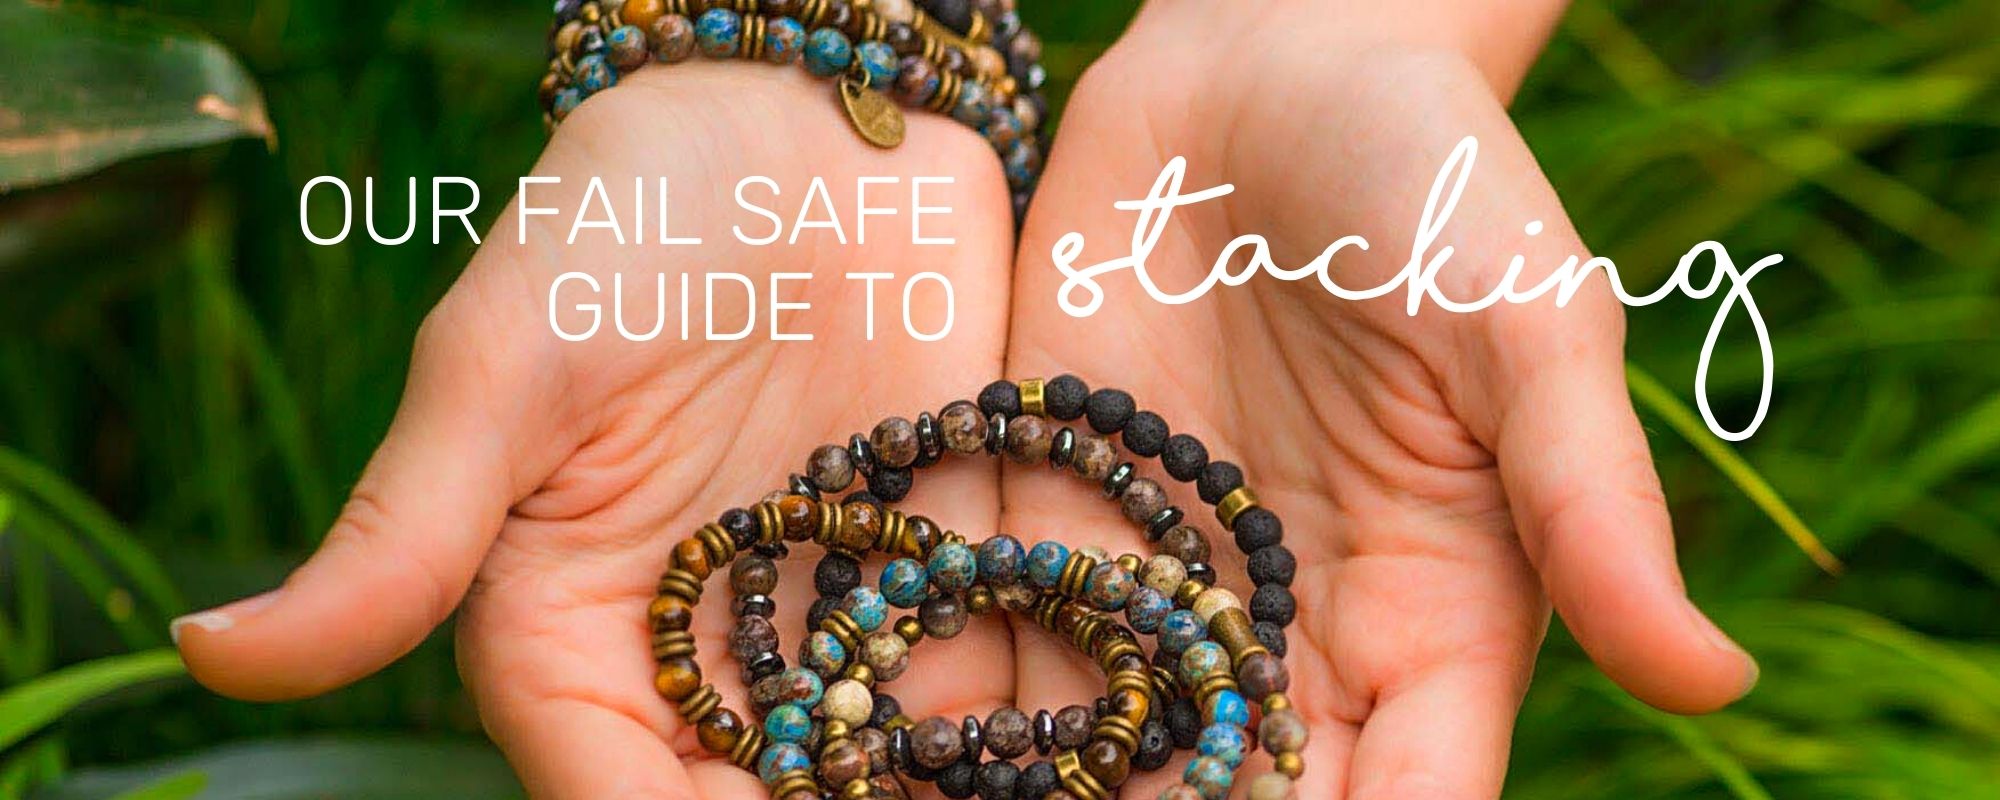 Our fail safe guide to stacking bracelets